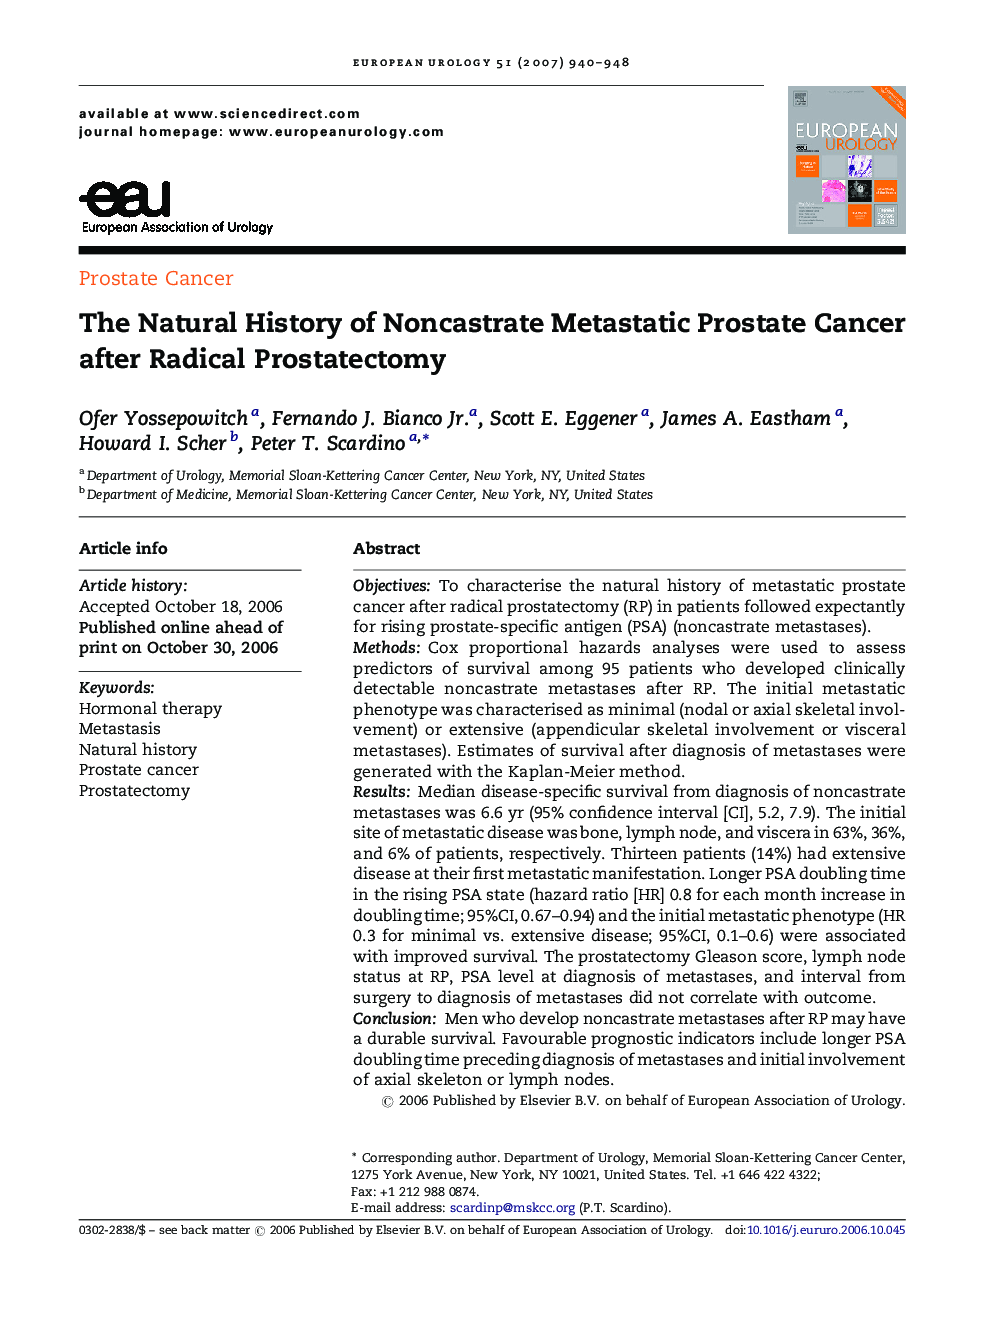 The Natural History of Noncastrate Metastatic Prostate Cancer after Radical Prostatectomy